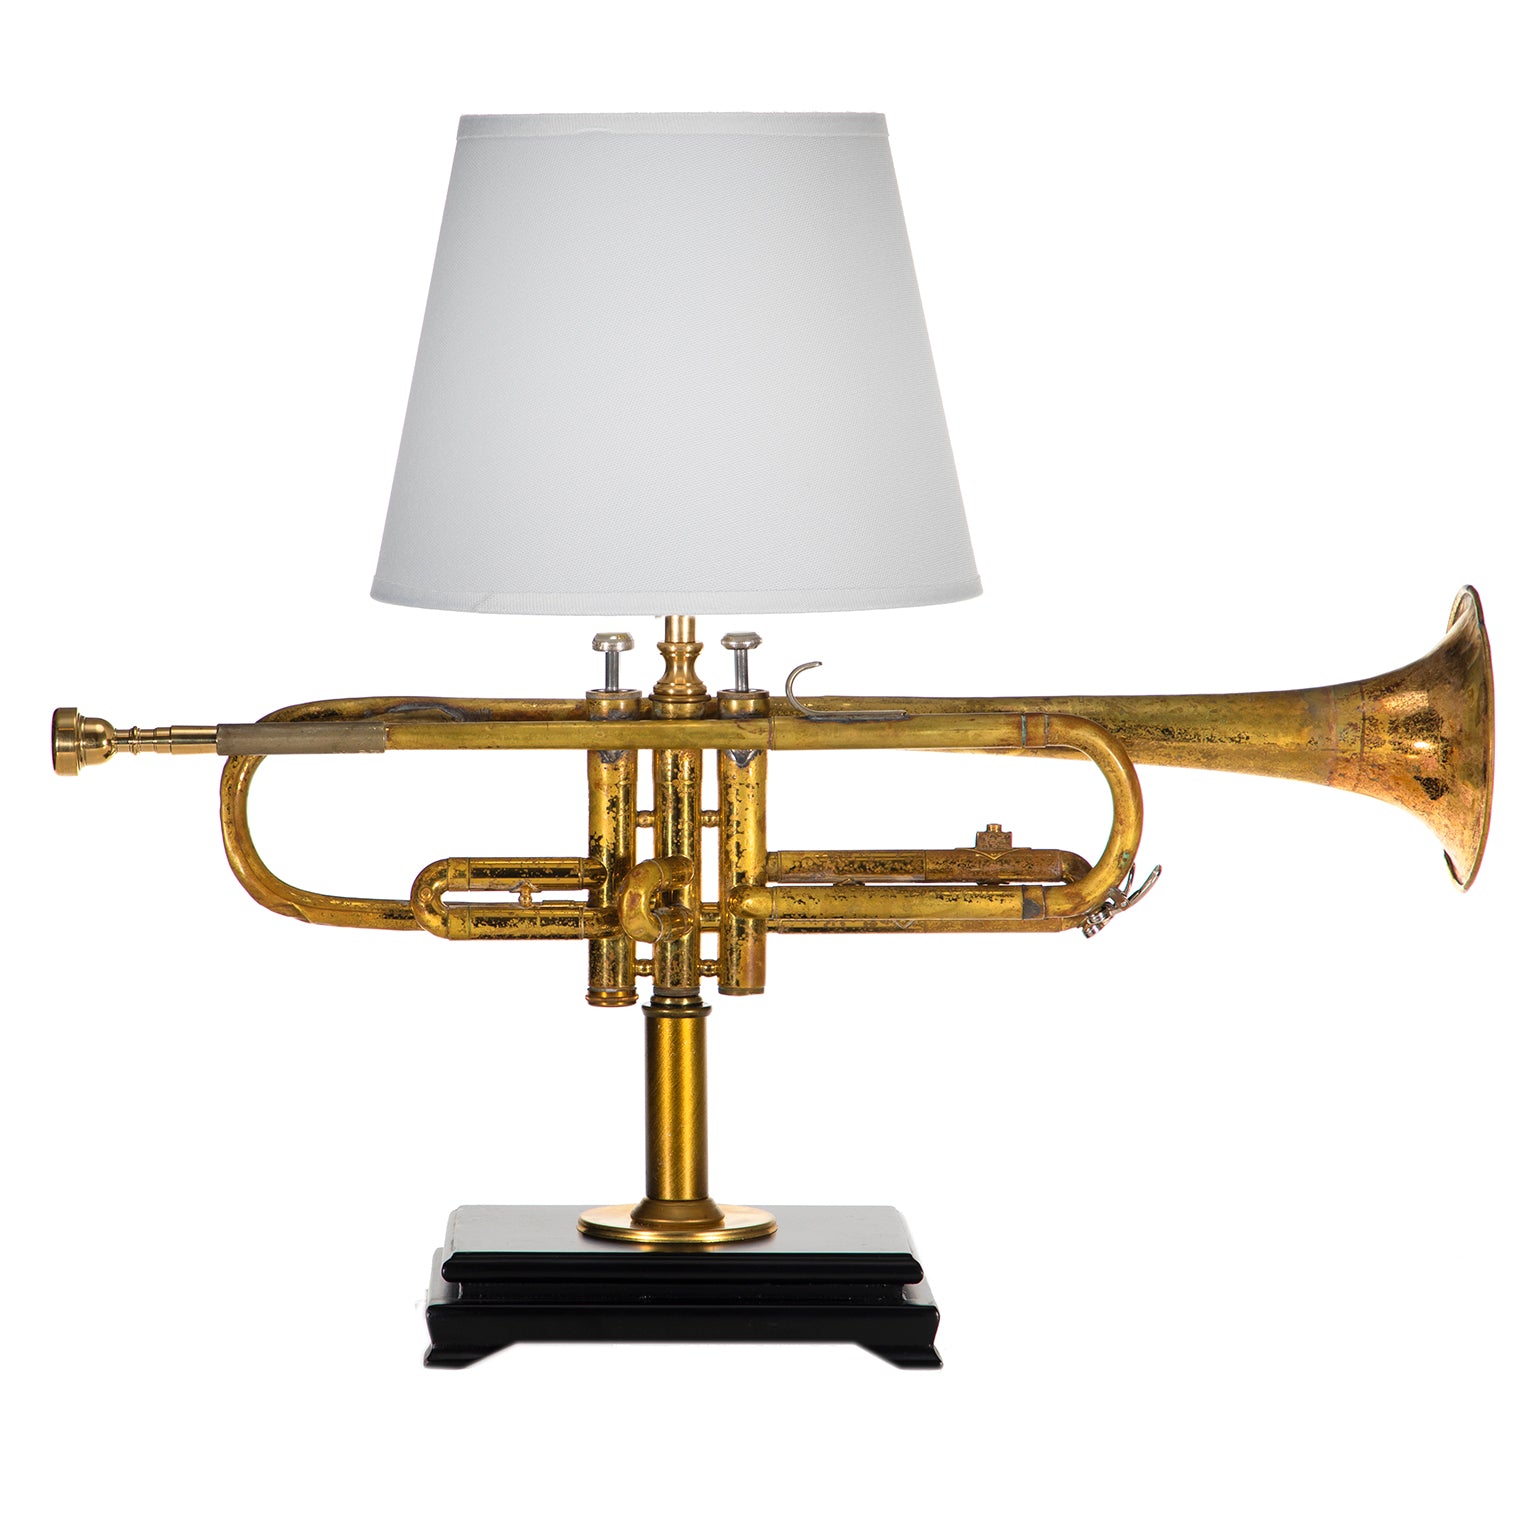 Vintage Trumpet Lamp - Hand Crafted One of Kind Musical Instru